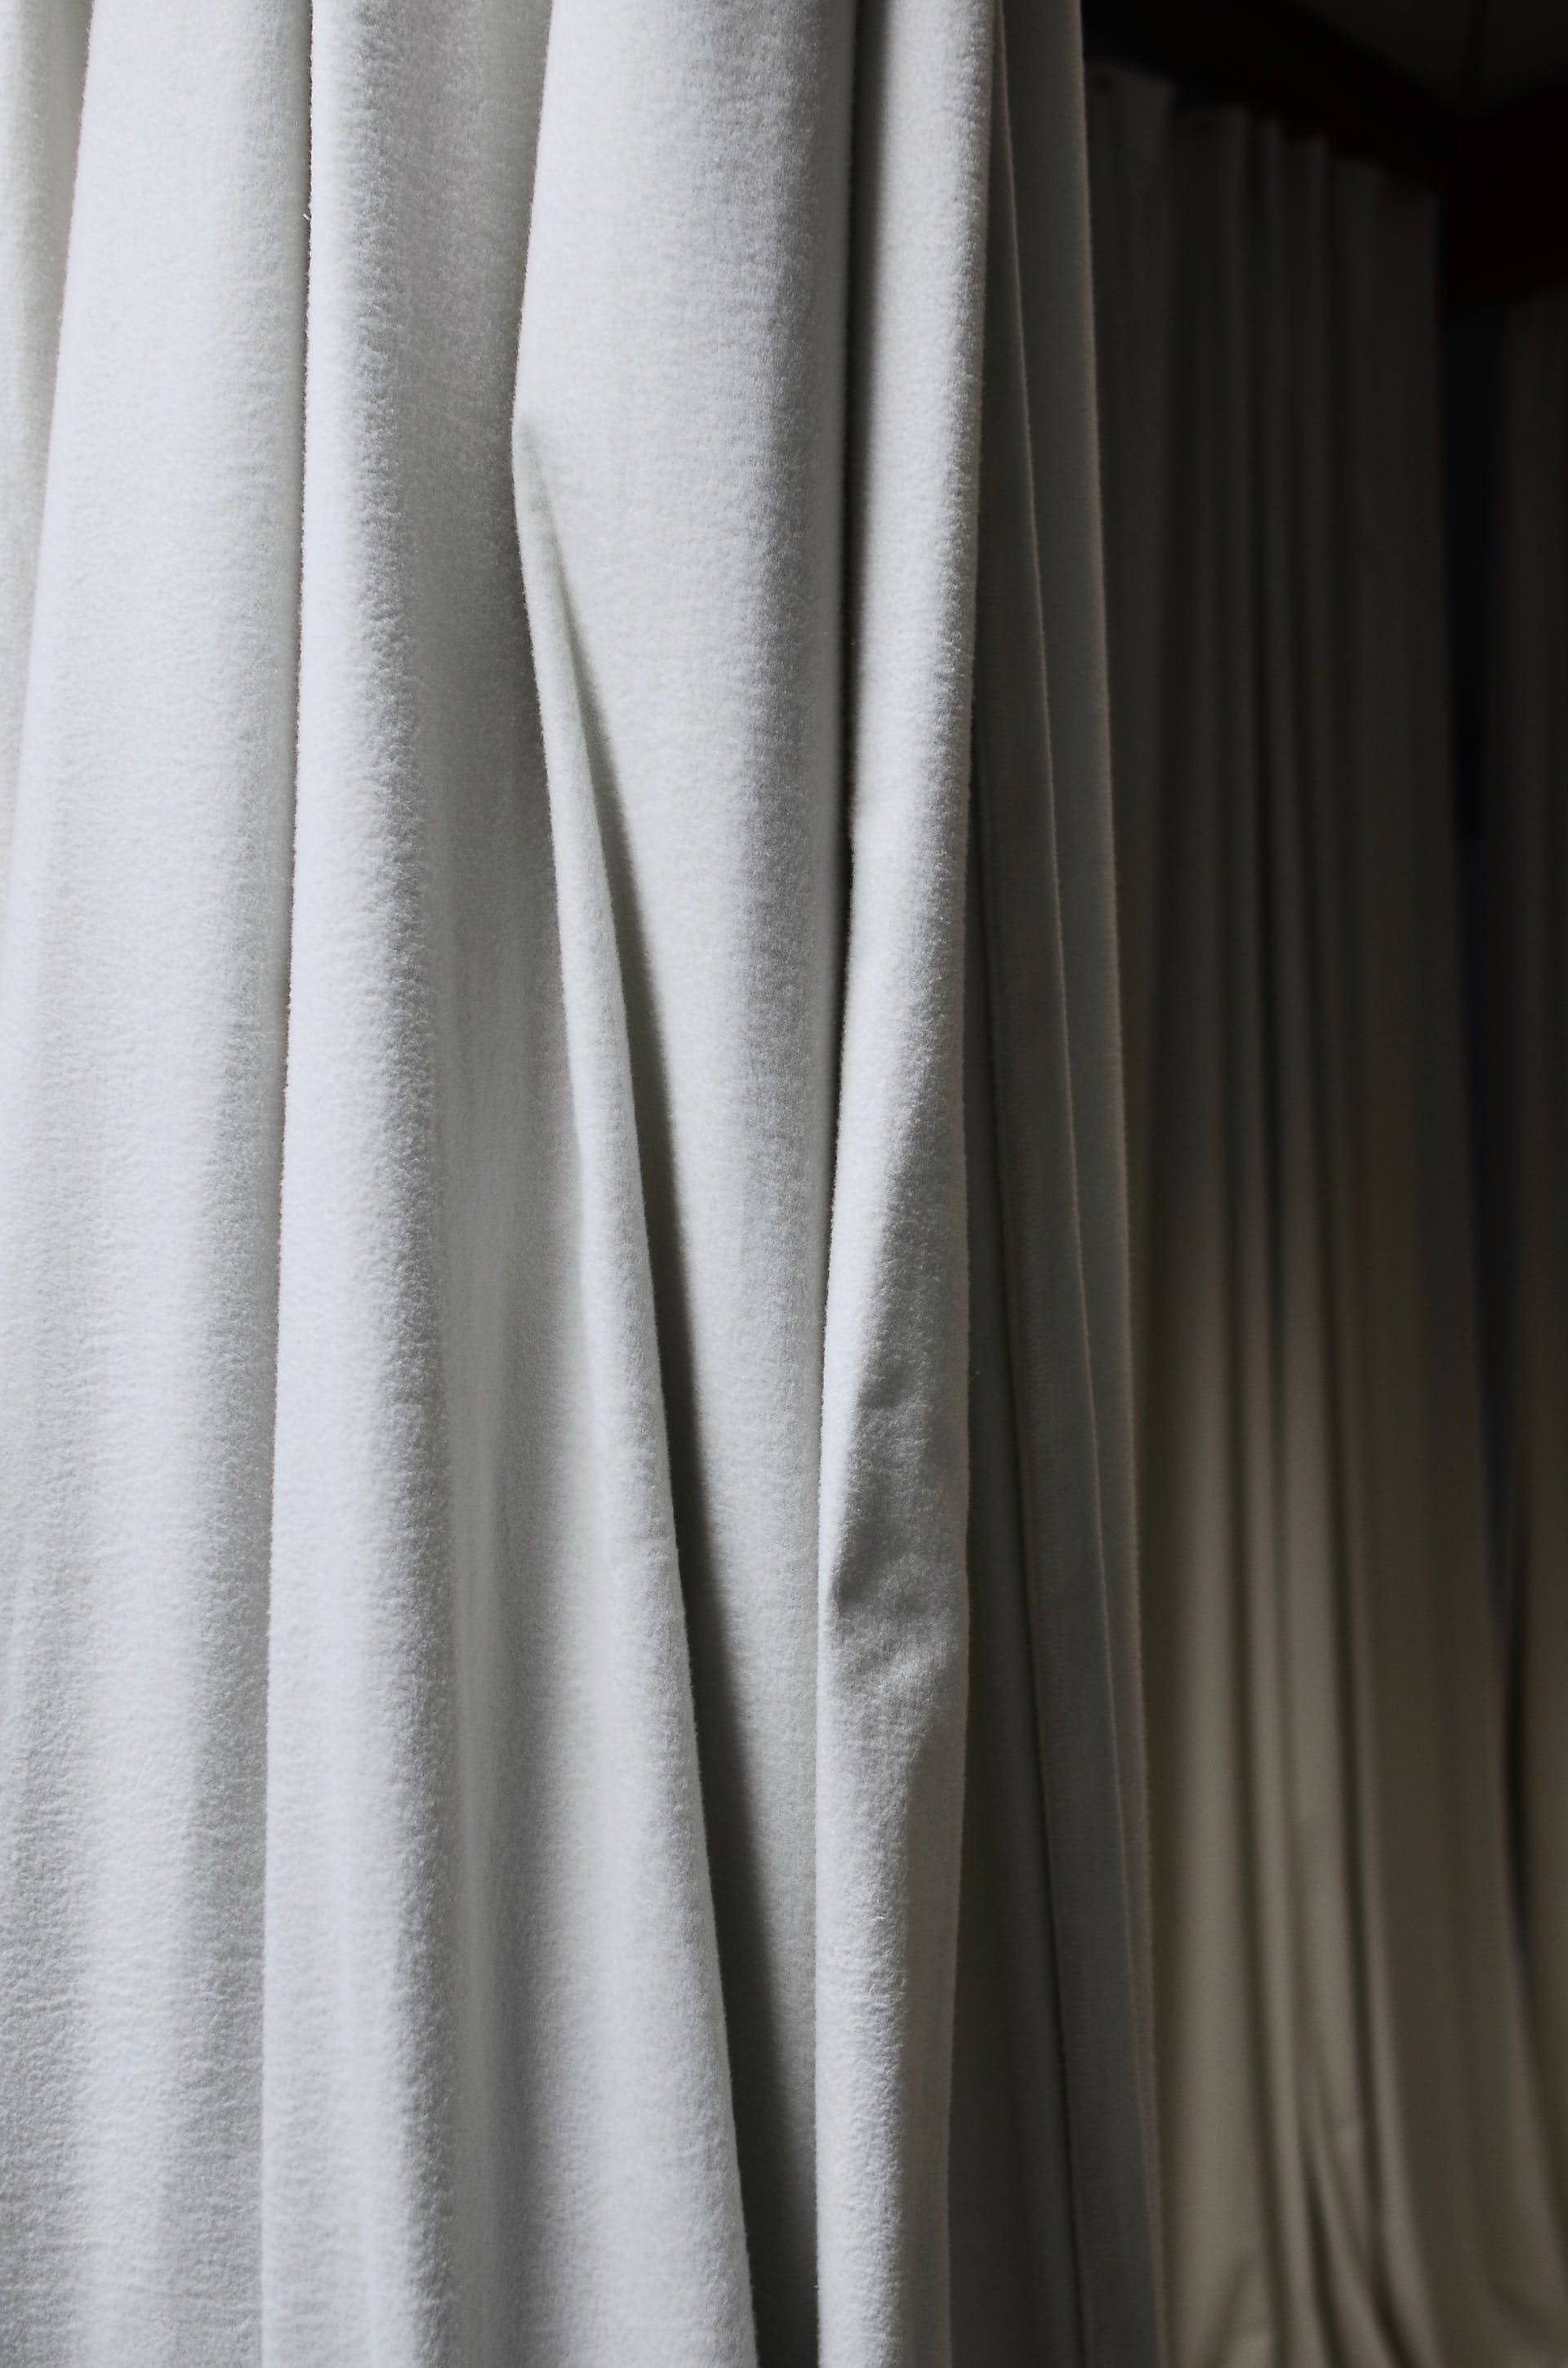 Close-up of curtains in a room | Source: Pexels